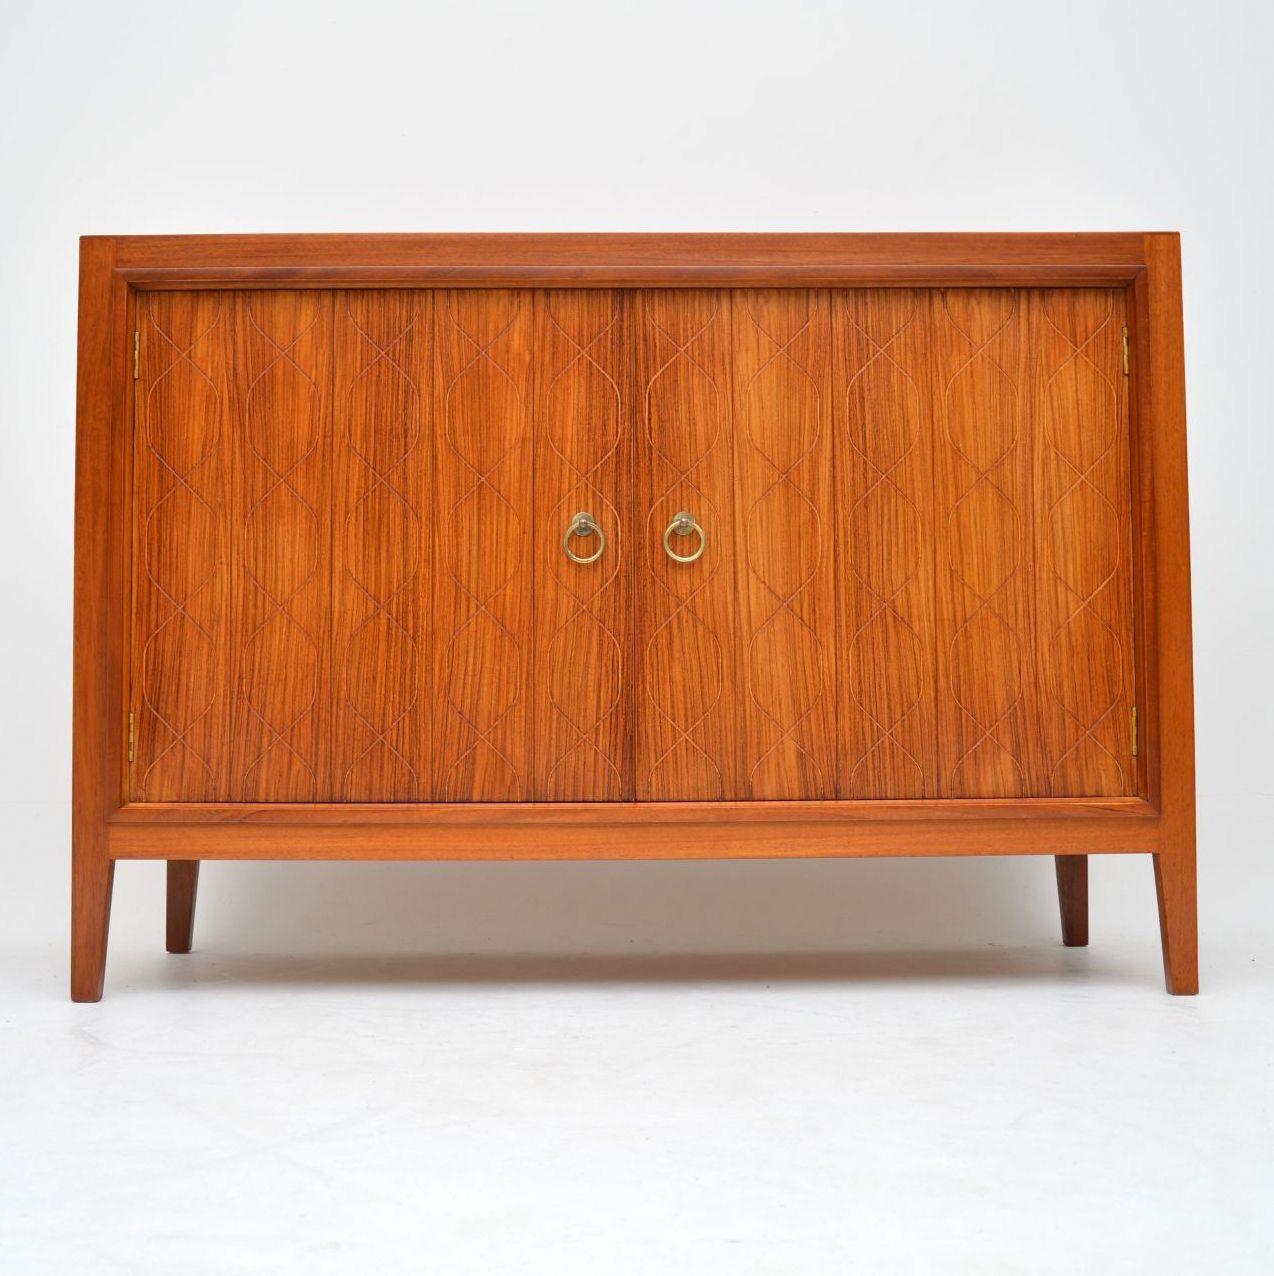 A stunning and iconic vintage sideboard designed by David Booth and Judith Ledeboer, manufactured by Gordon Russell. This was designed in the very early 1950s, and was on display at the festival of Britain in 1951. It went into production from 1953,